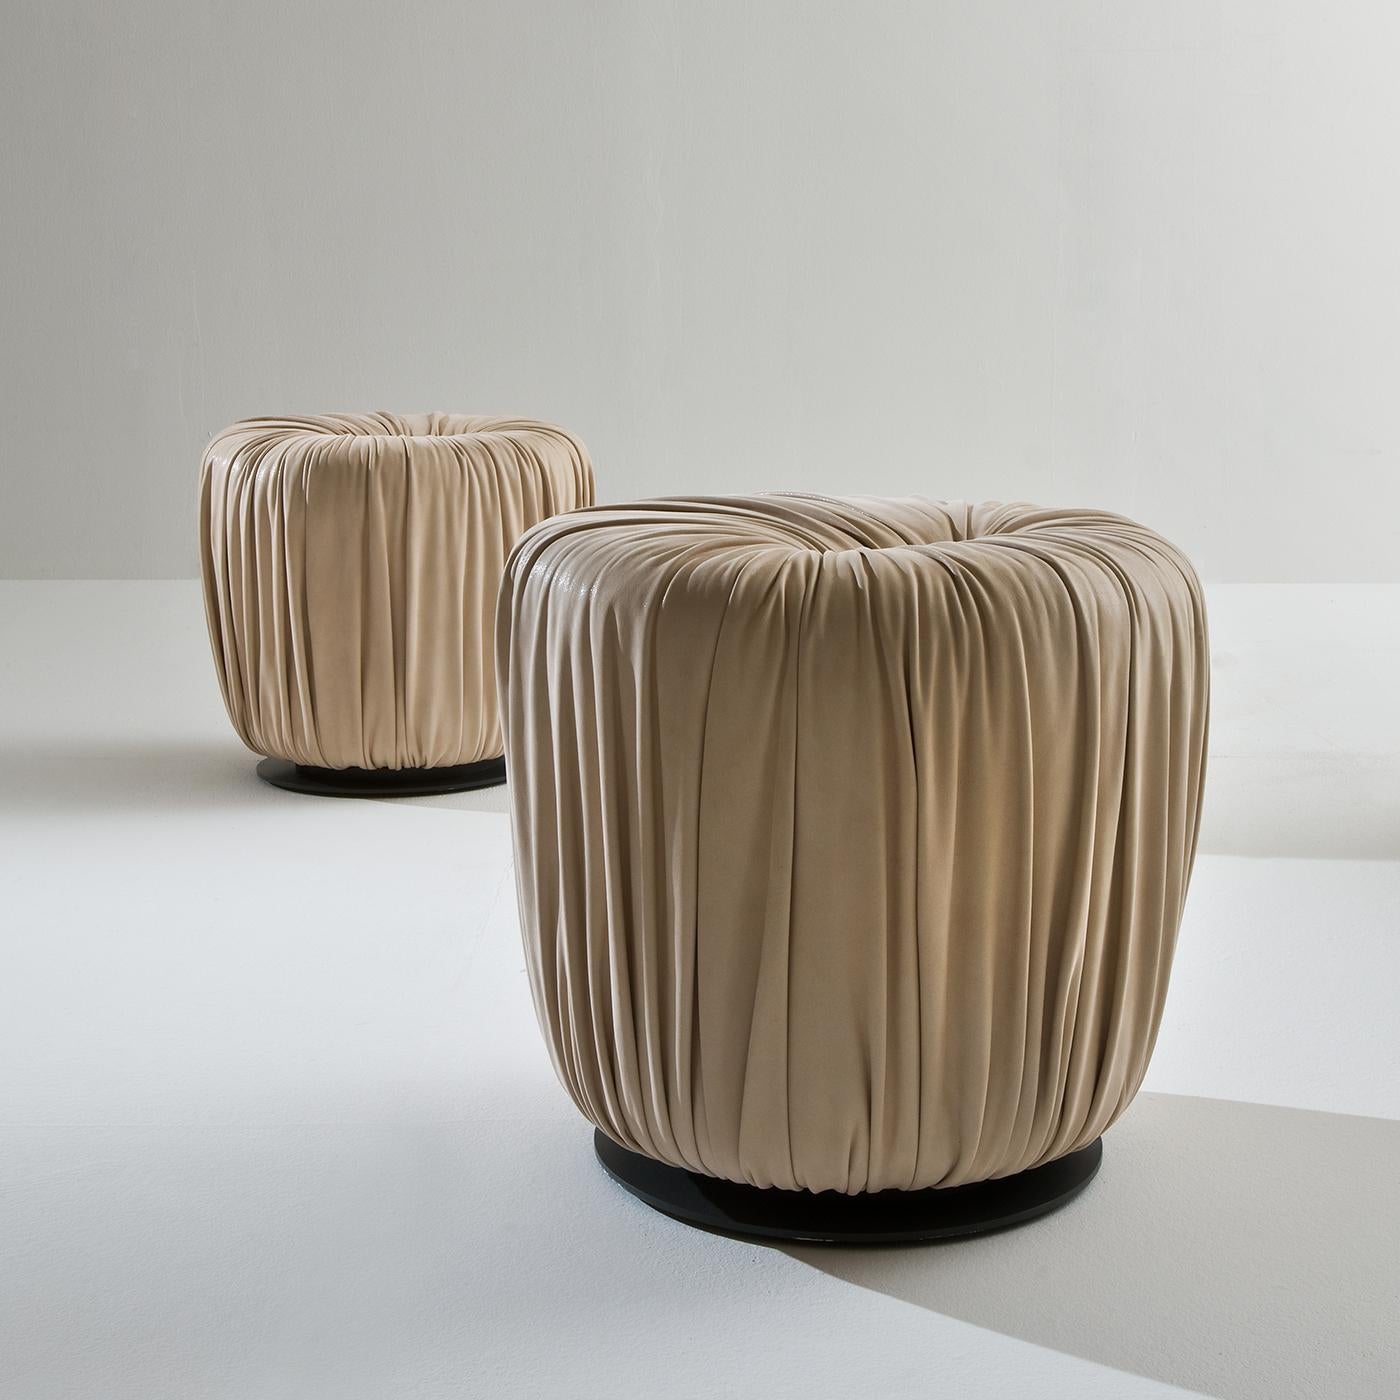 The unique sartorial work of the this pouf series is immediately recognizable for creating soft shapes. The Drapé Collection is a set of upholstered poufs covered in leather or velvet, with a base in metal. This luxurious round pouf is upholstered